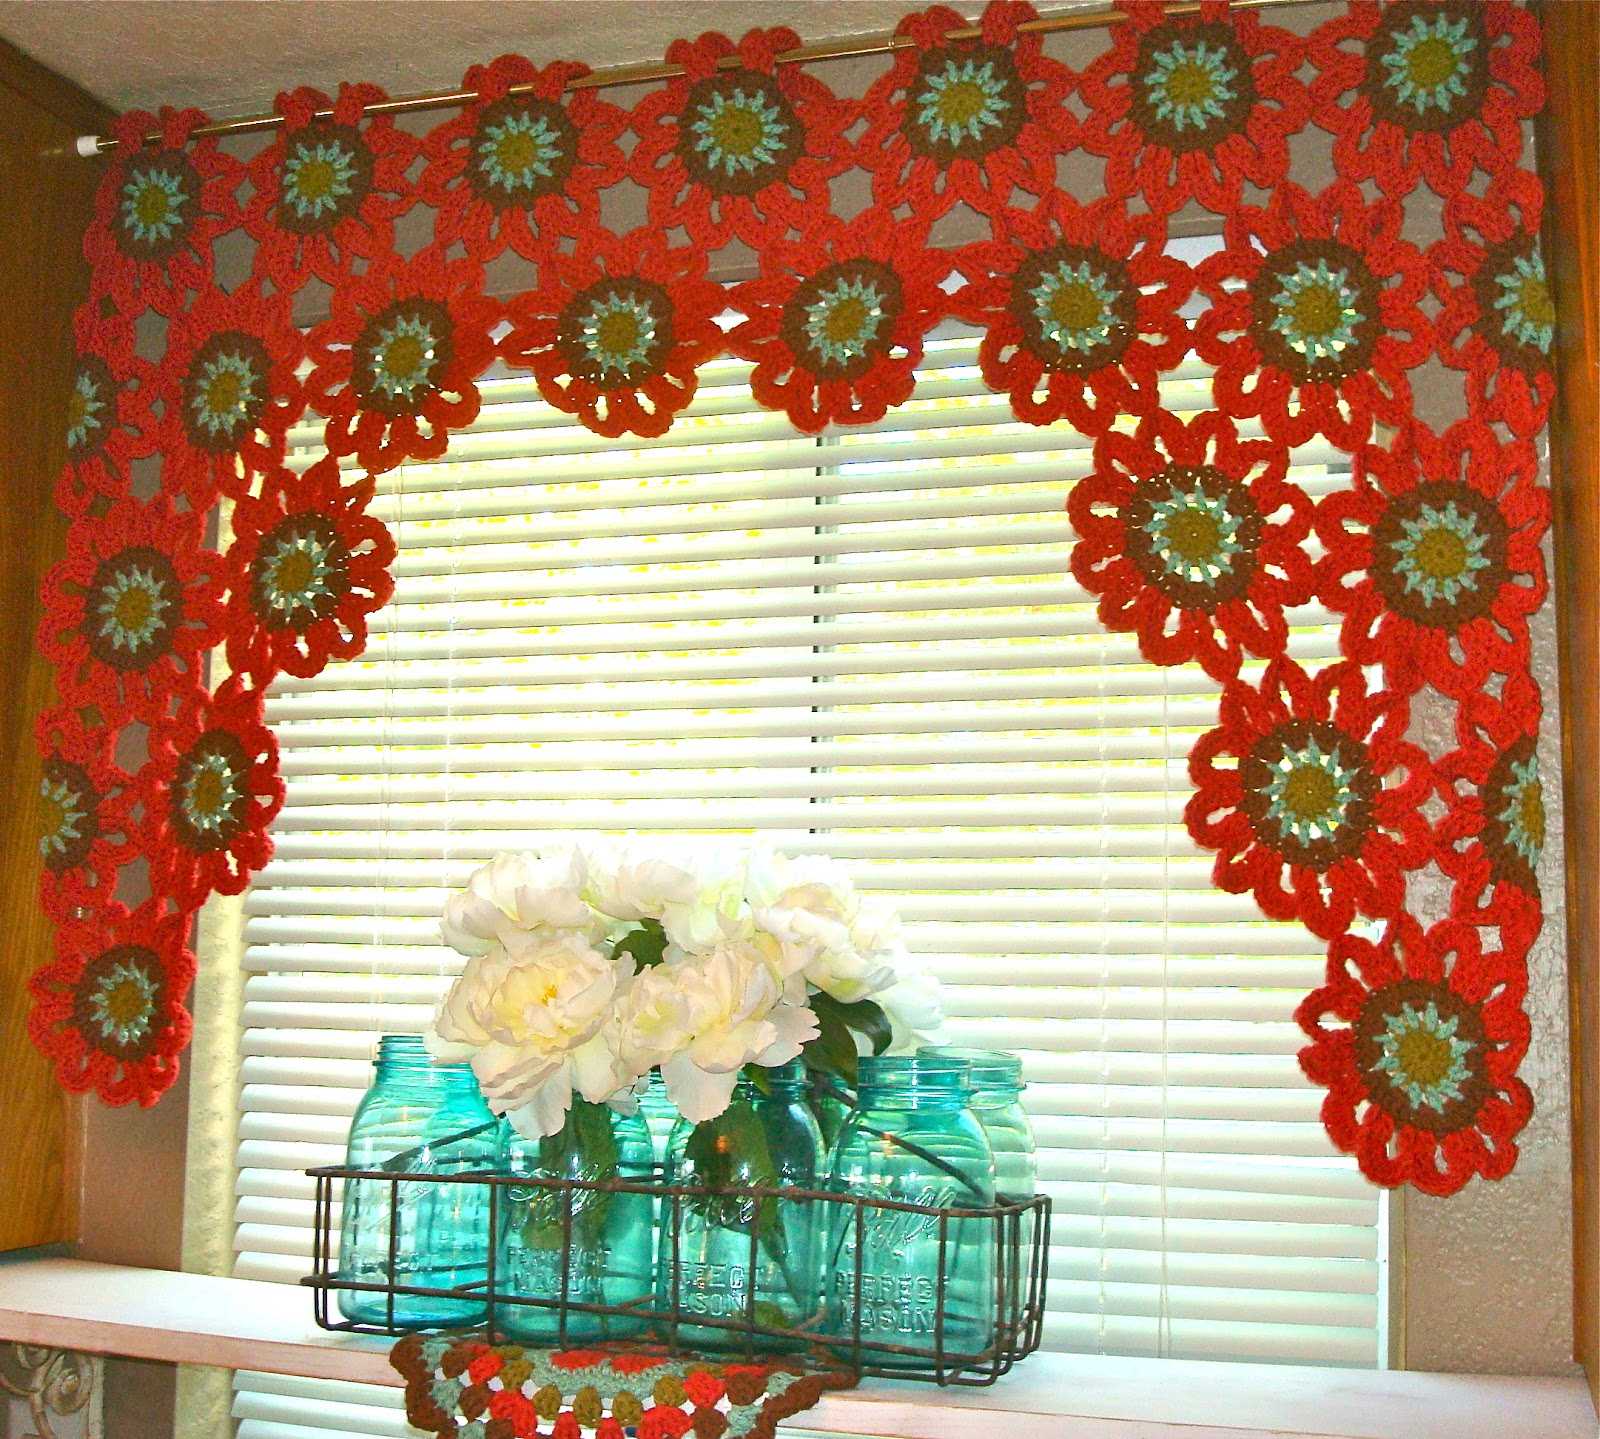 crocheted living room style covers